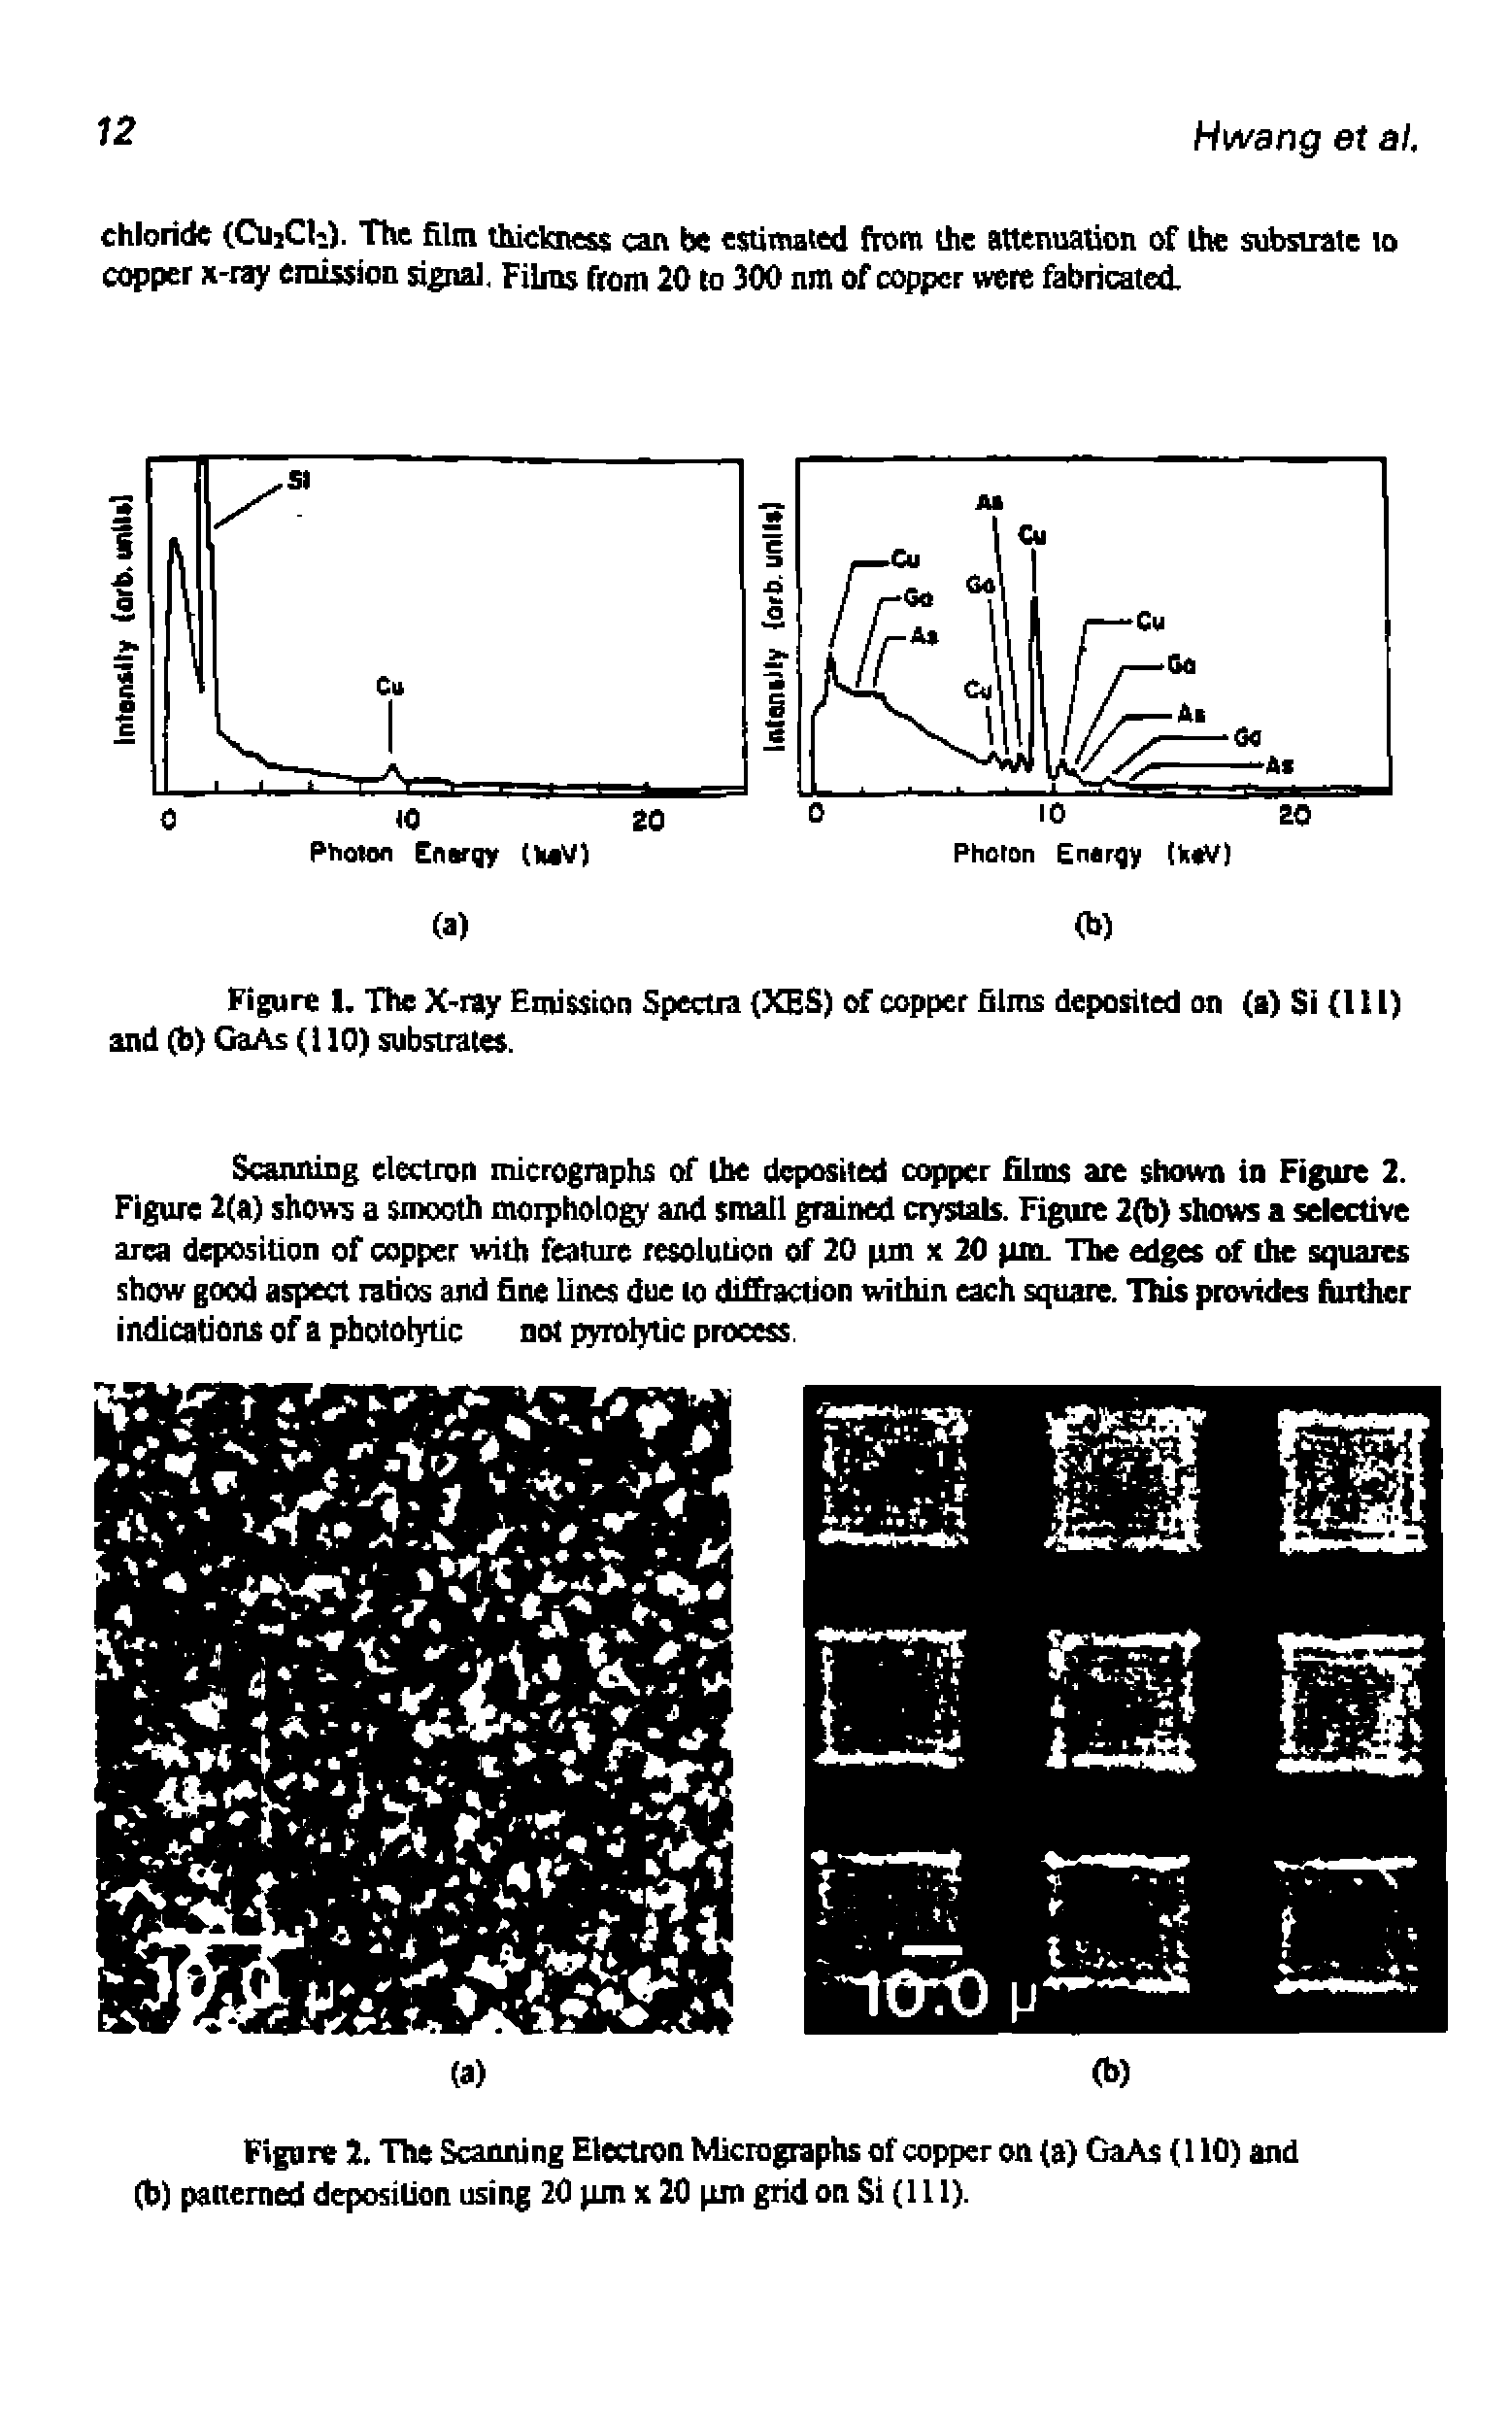 Figure 2. The Scanning Electron Micrographs of copper on (a) GaAs (110) and (b) patterned deposition using 20 pm x 20 pm grid on SI (111).